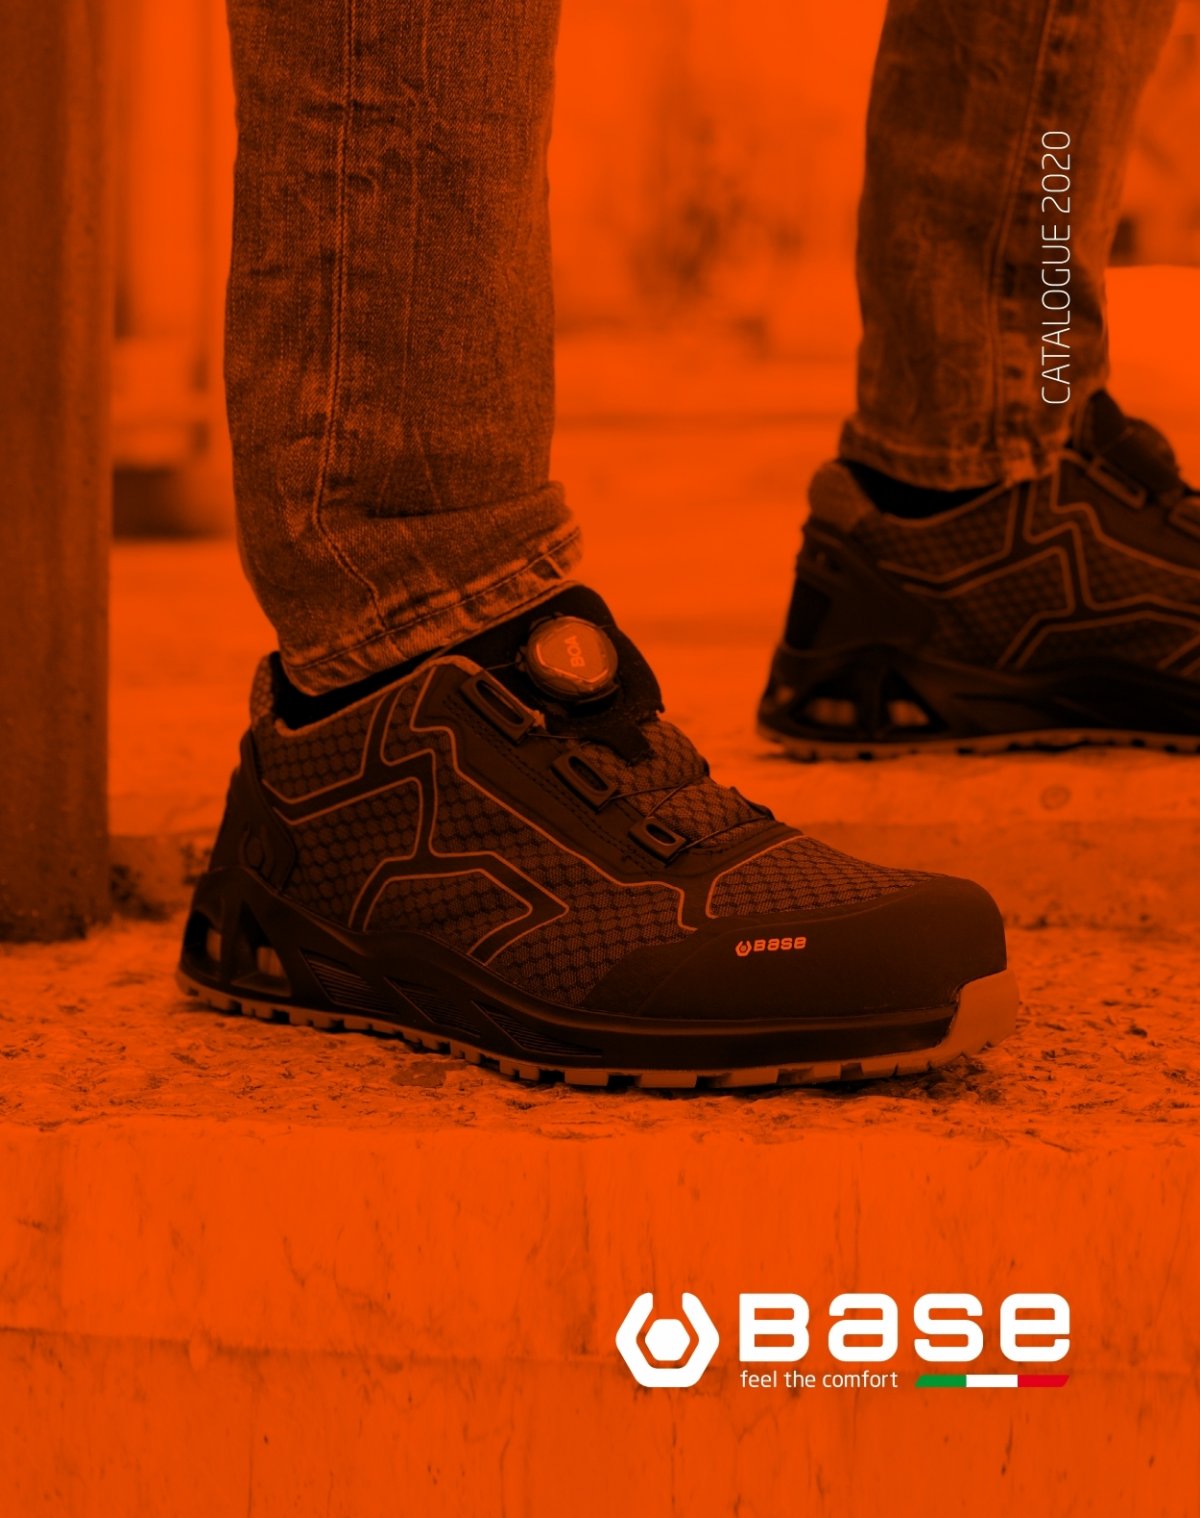 Construction safety shoes - B0163 COLOSSEUM - BASE PROTECTION - mechanical  protection / leather / S1P